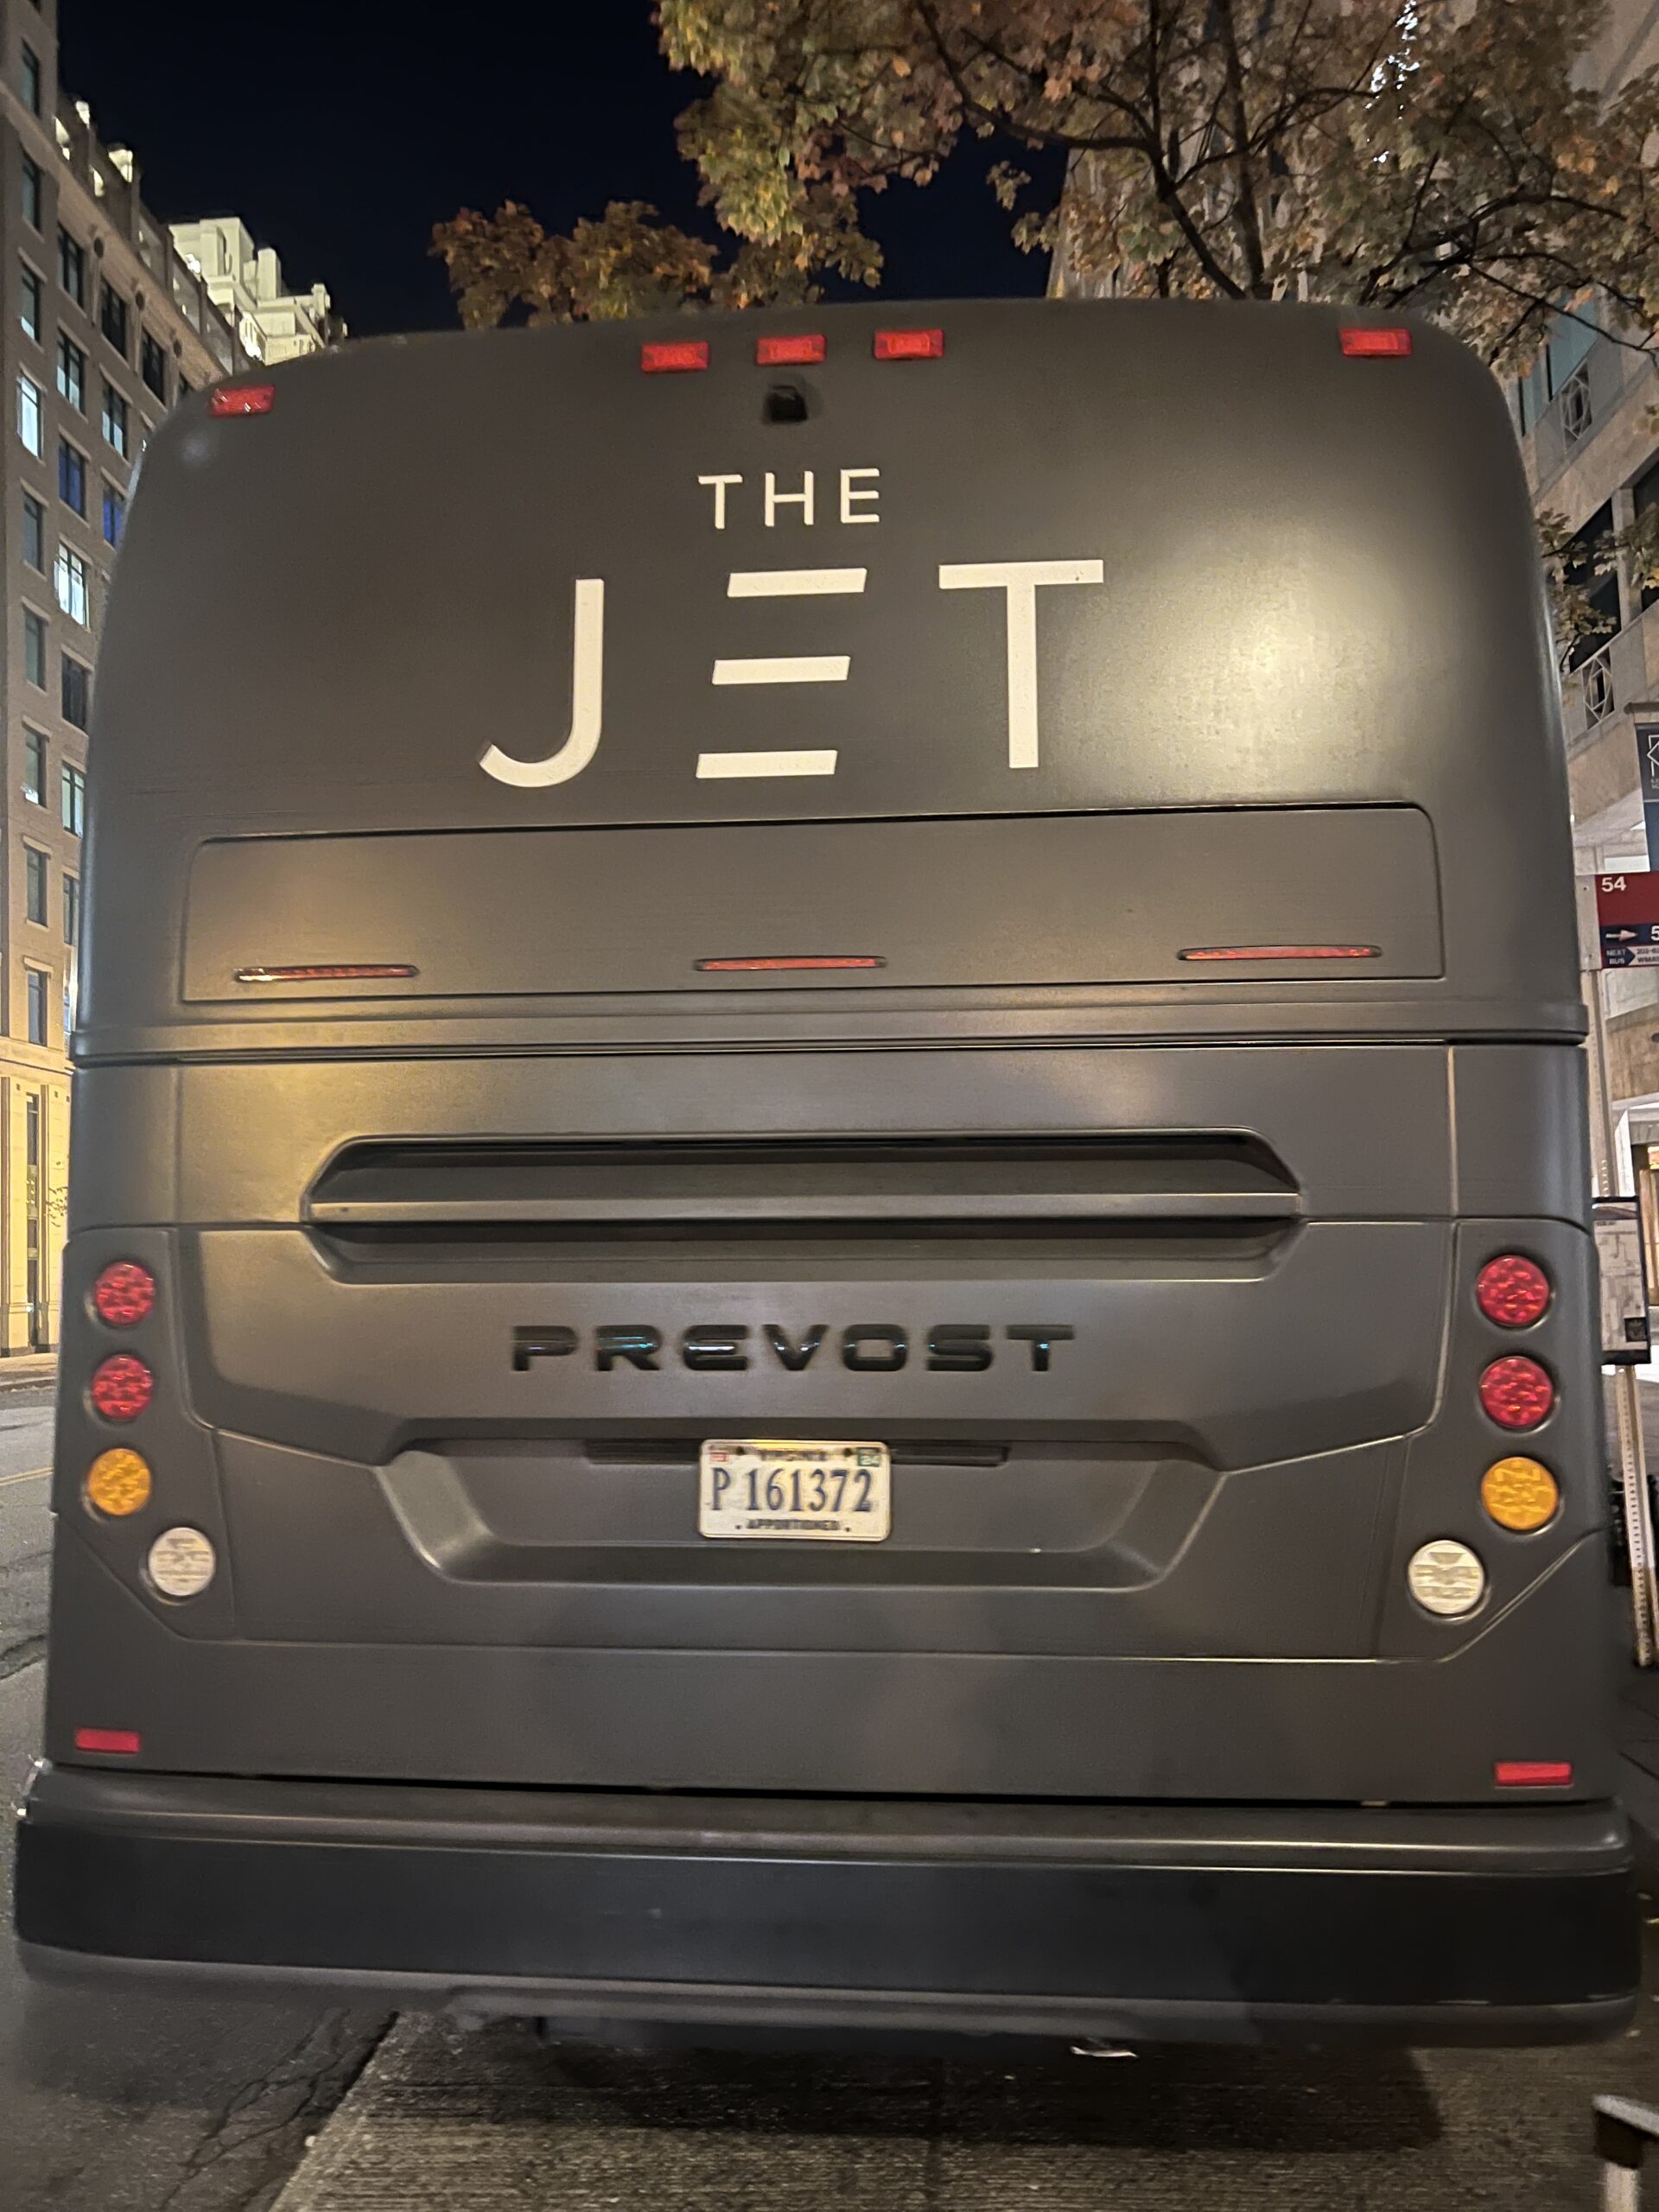 The Back of The Jet Bus 